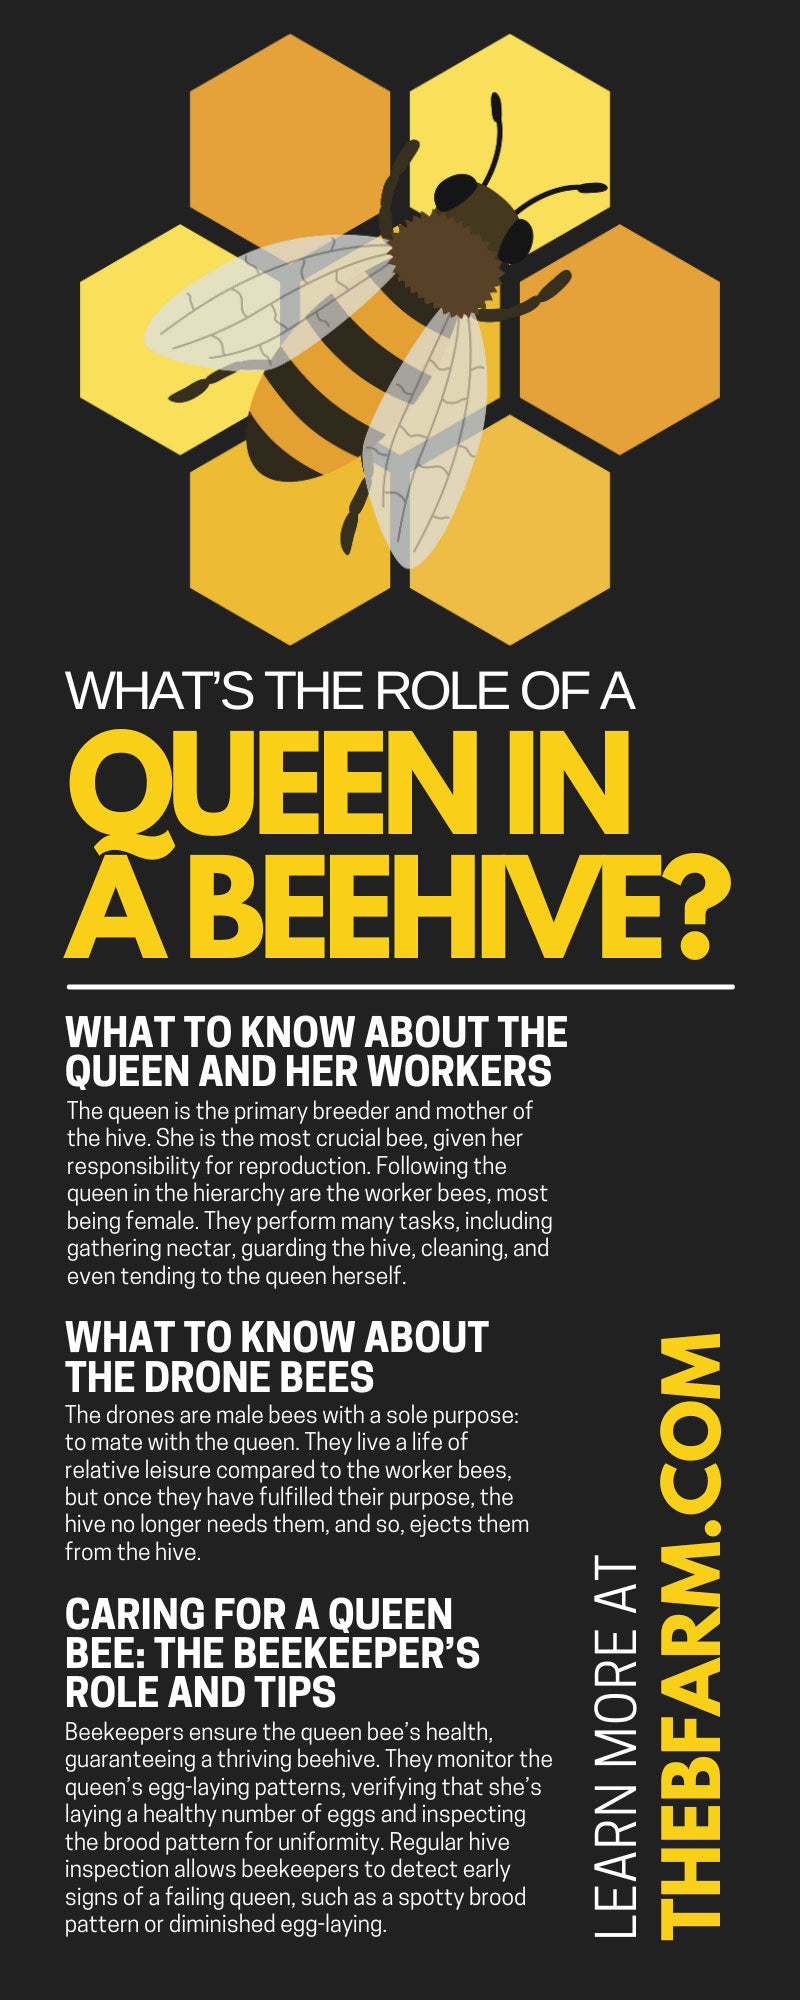 What’s the Role of a Queen in a Beehive?